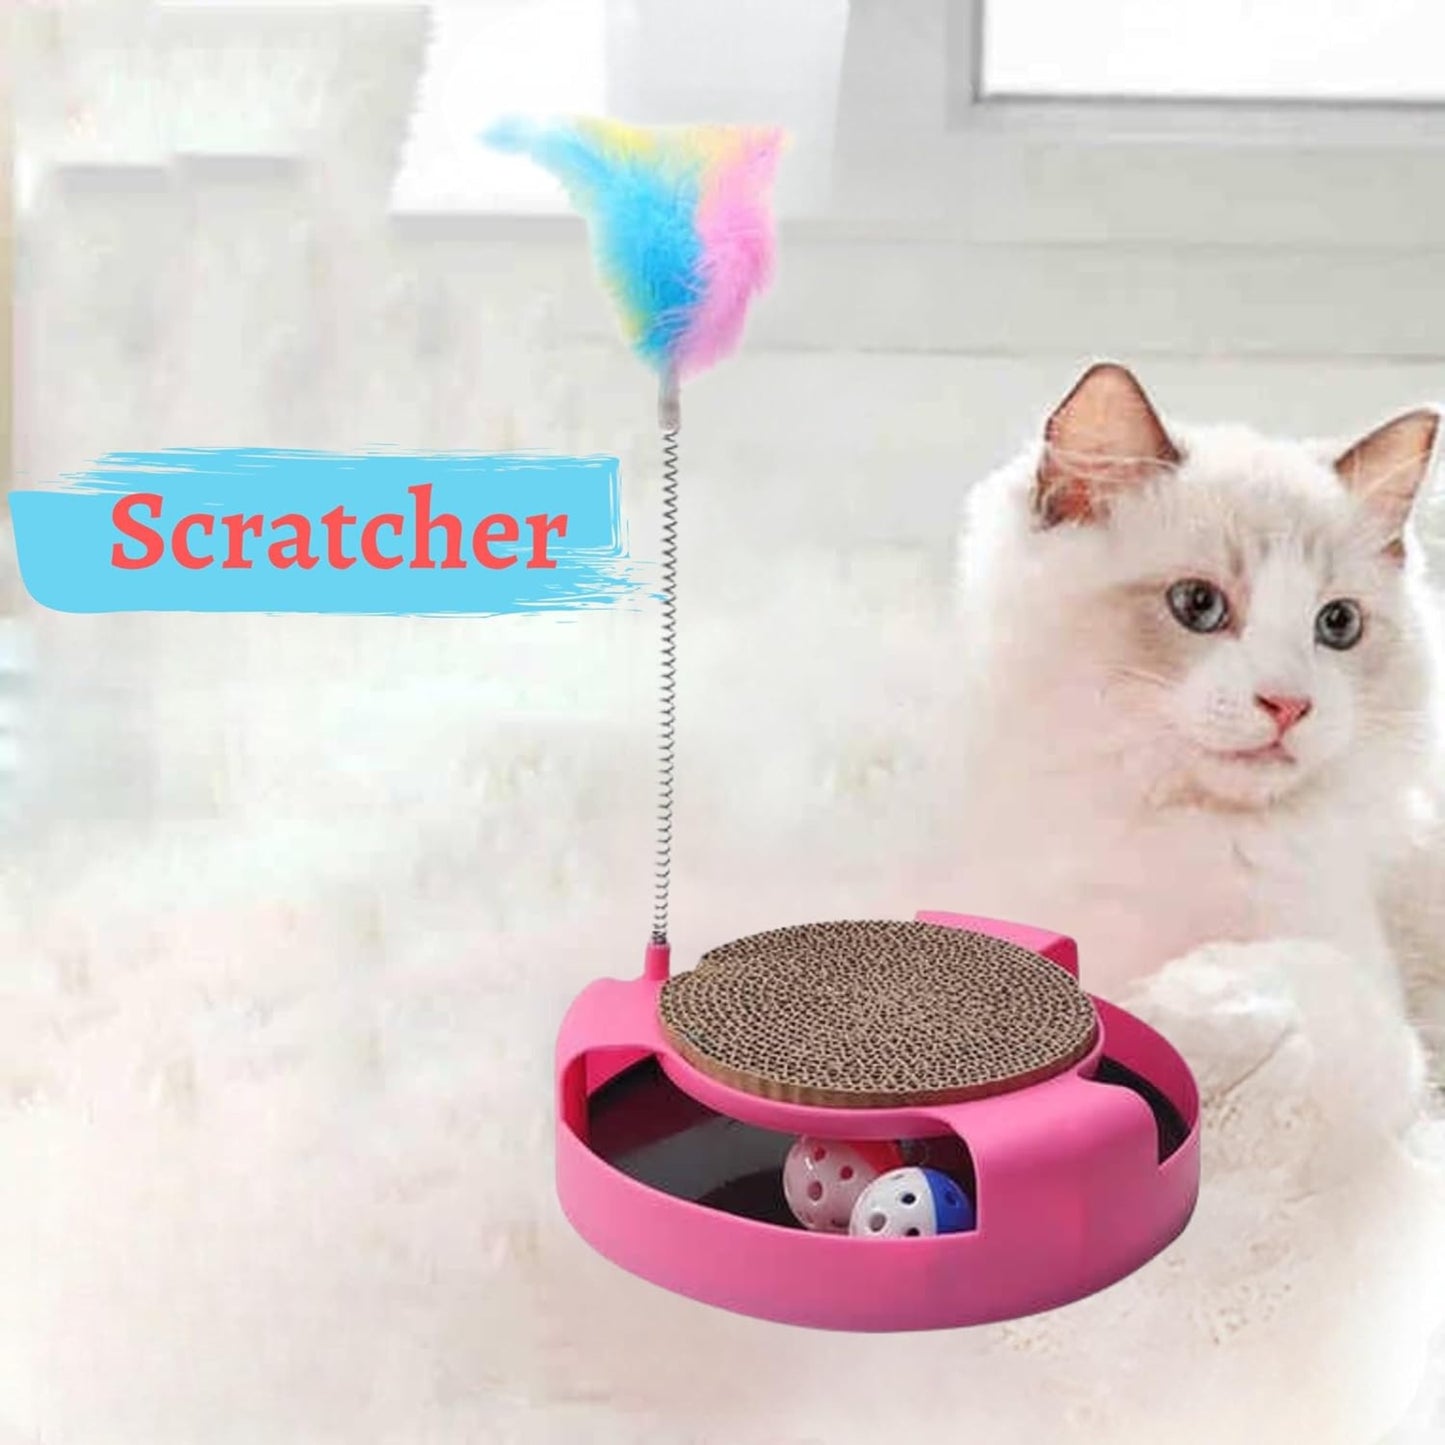 Foodie Puppies Interactive Spinny Scratch Toy for Cats & Kittens